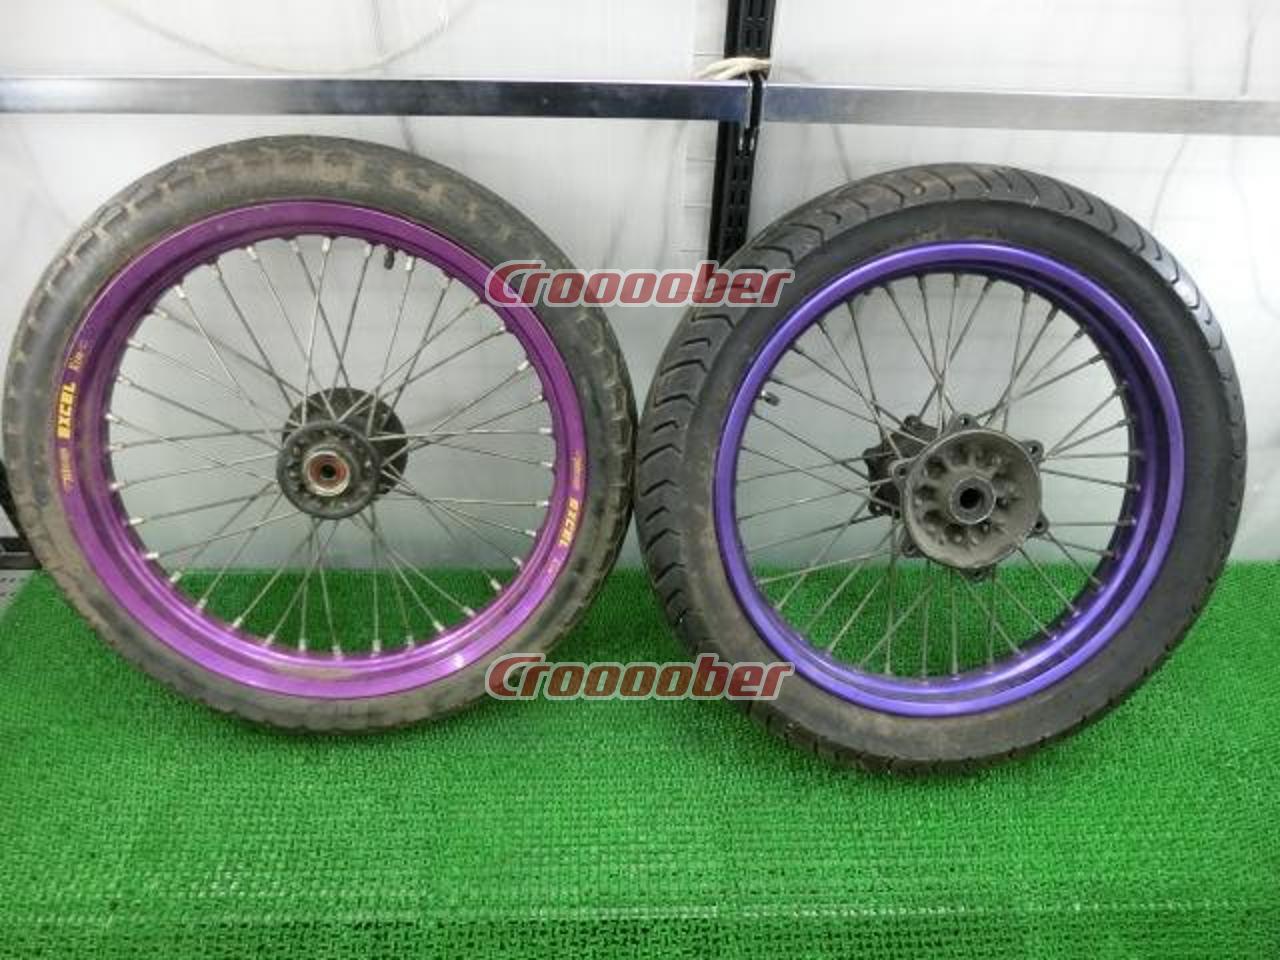 It Has Been Price Cut! EXCEL For KDX200SR 90 To 9 Takasago Rear +  Manufacturer Unknown Front Wheel Set Purple 1 Cars - Rims for Sale |  Croooober